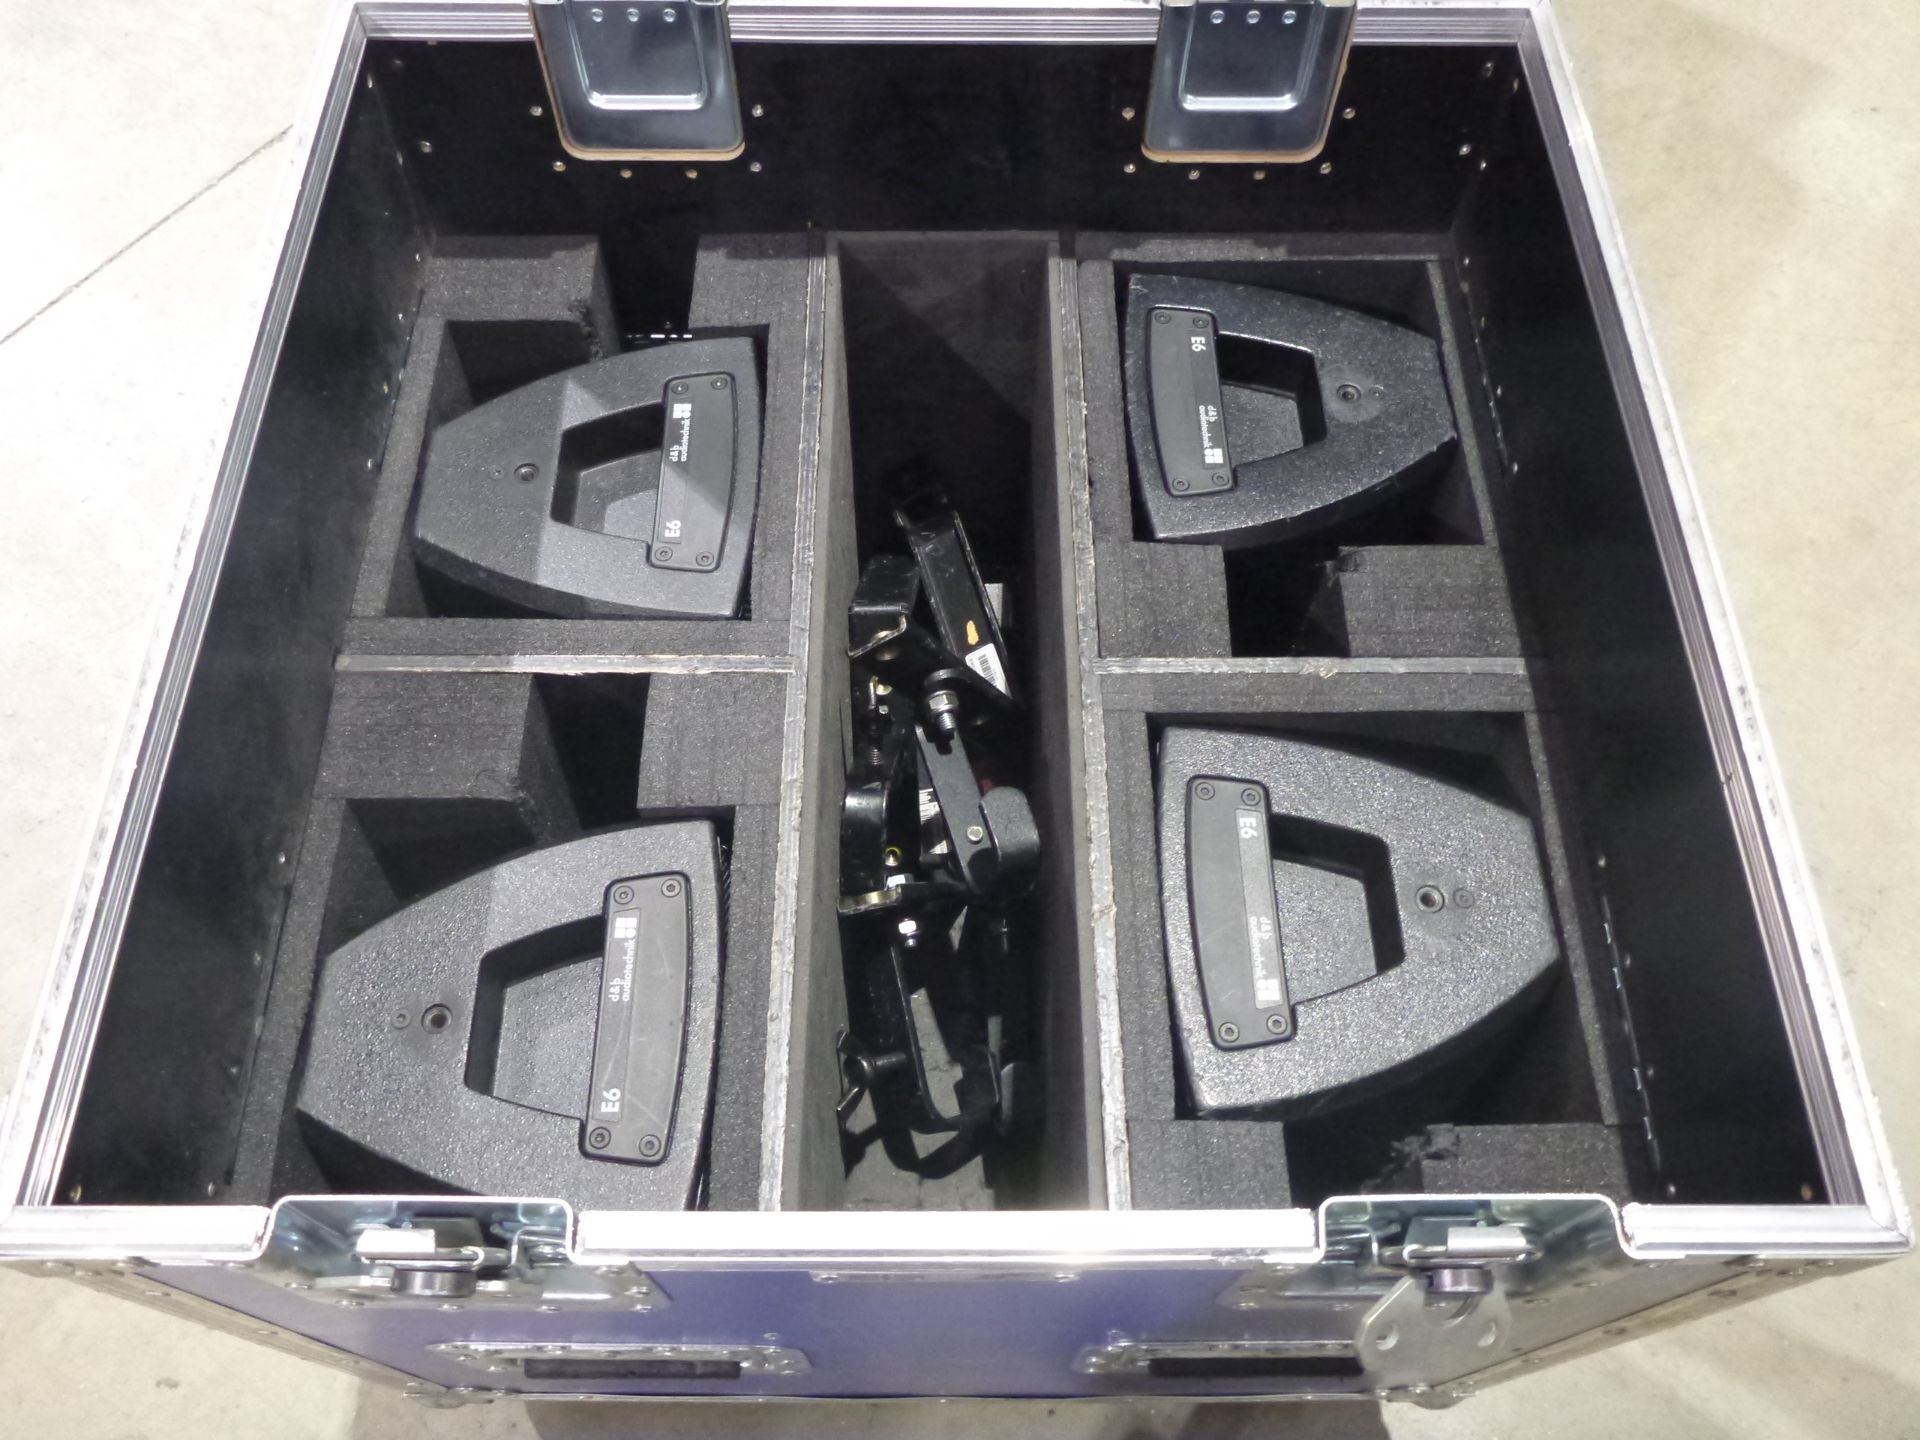 D & B Audiotecknik E6 Loundspeakers (Qty 4) In flight case with fly bar and top hat, No safetys, S/